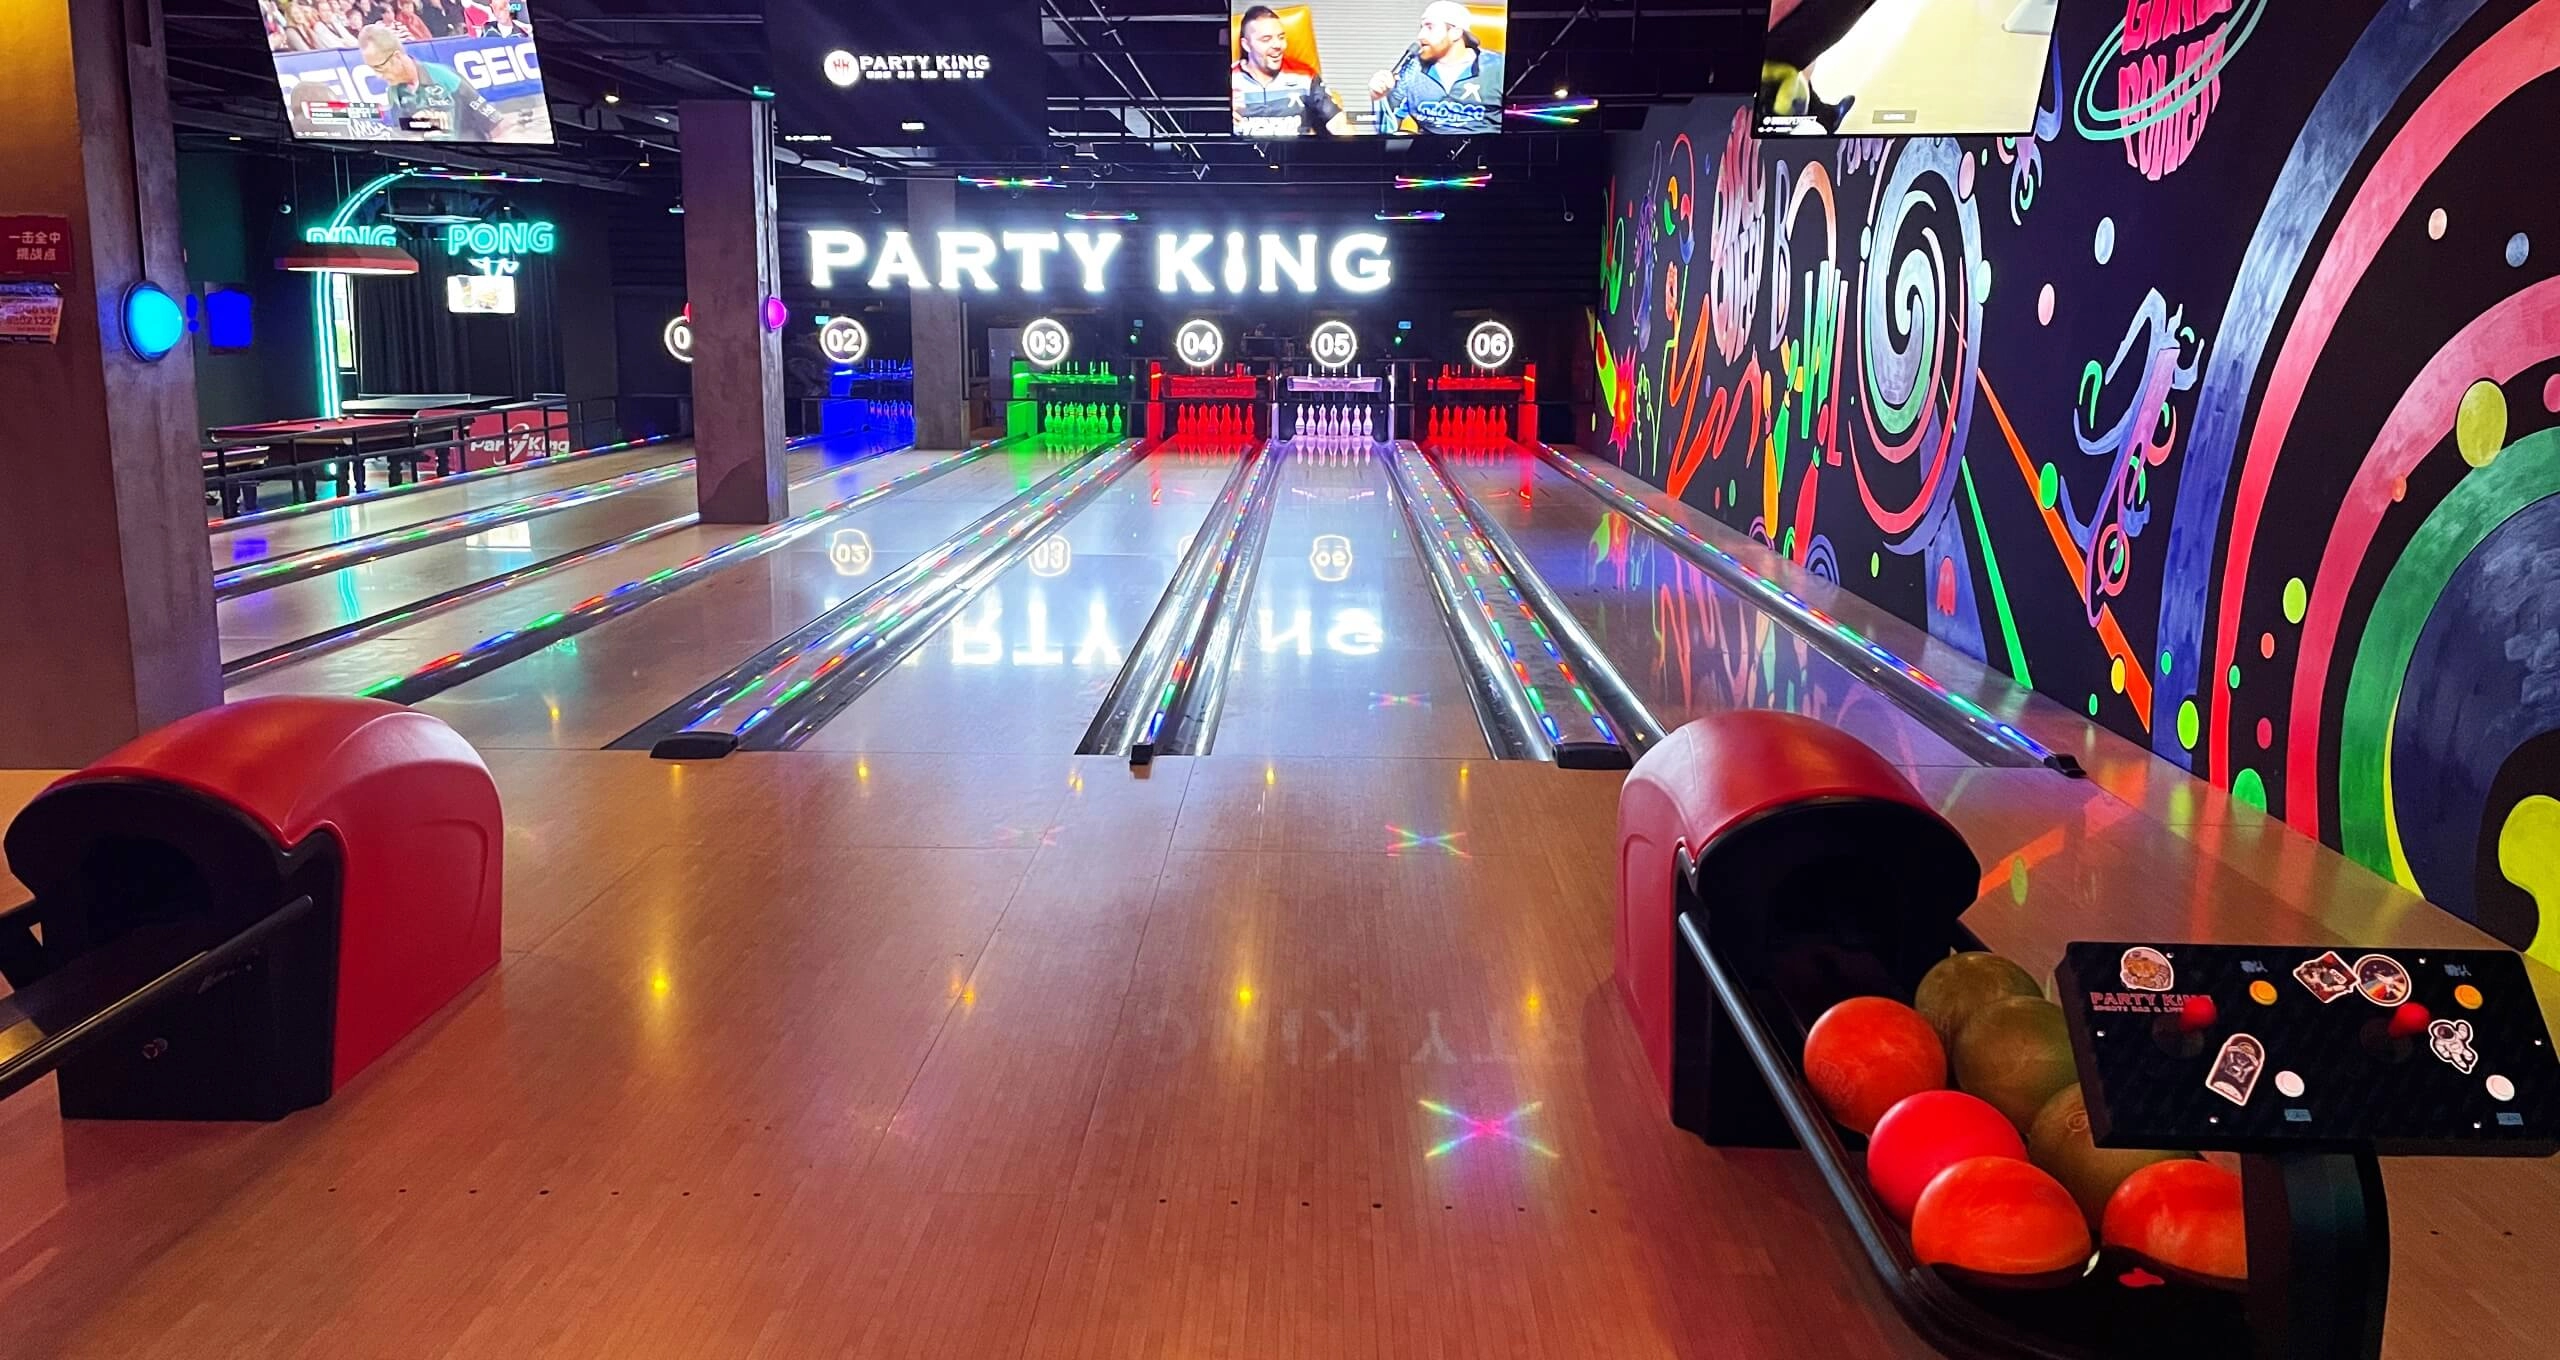 Shanghai Nanhui Party King adult bowling alley Details